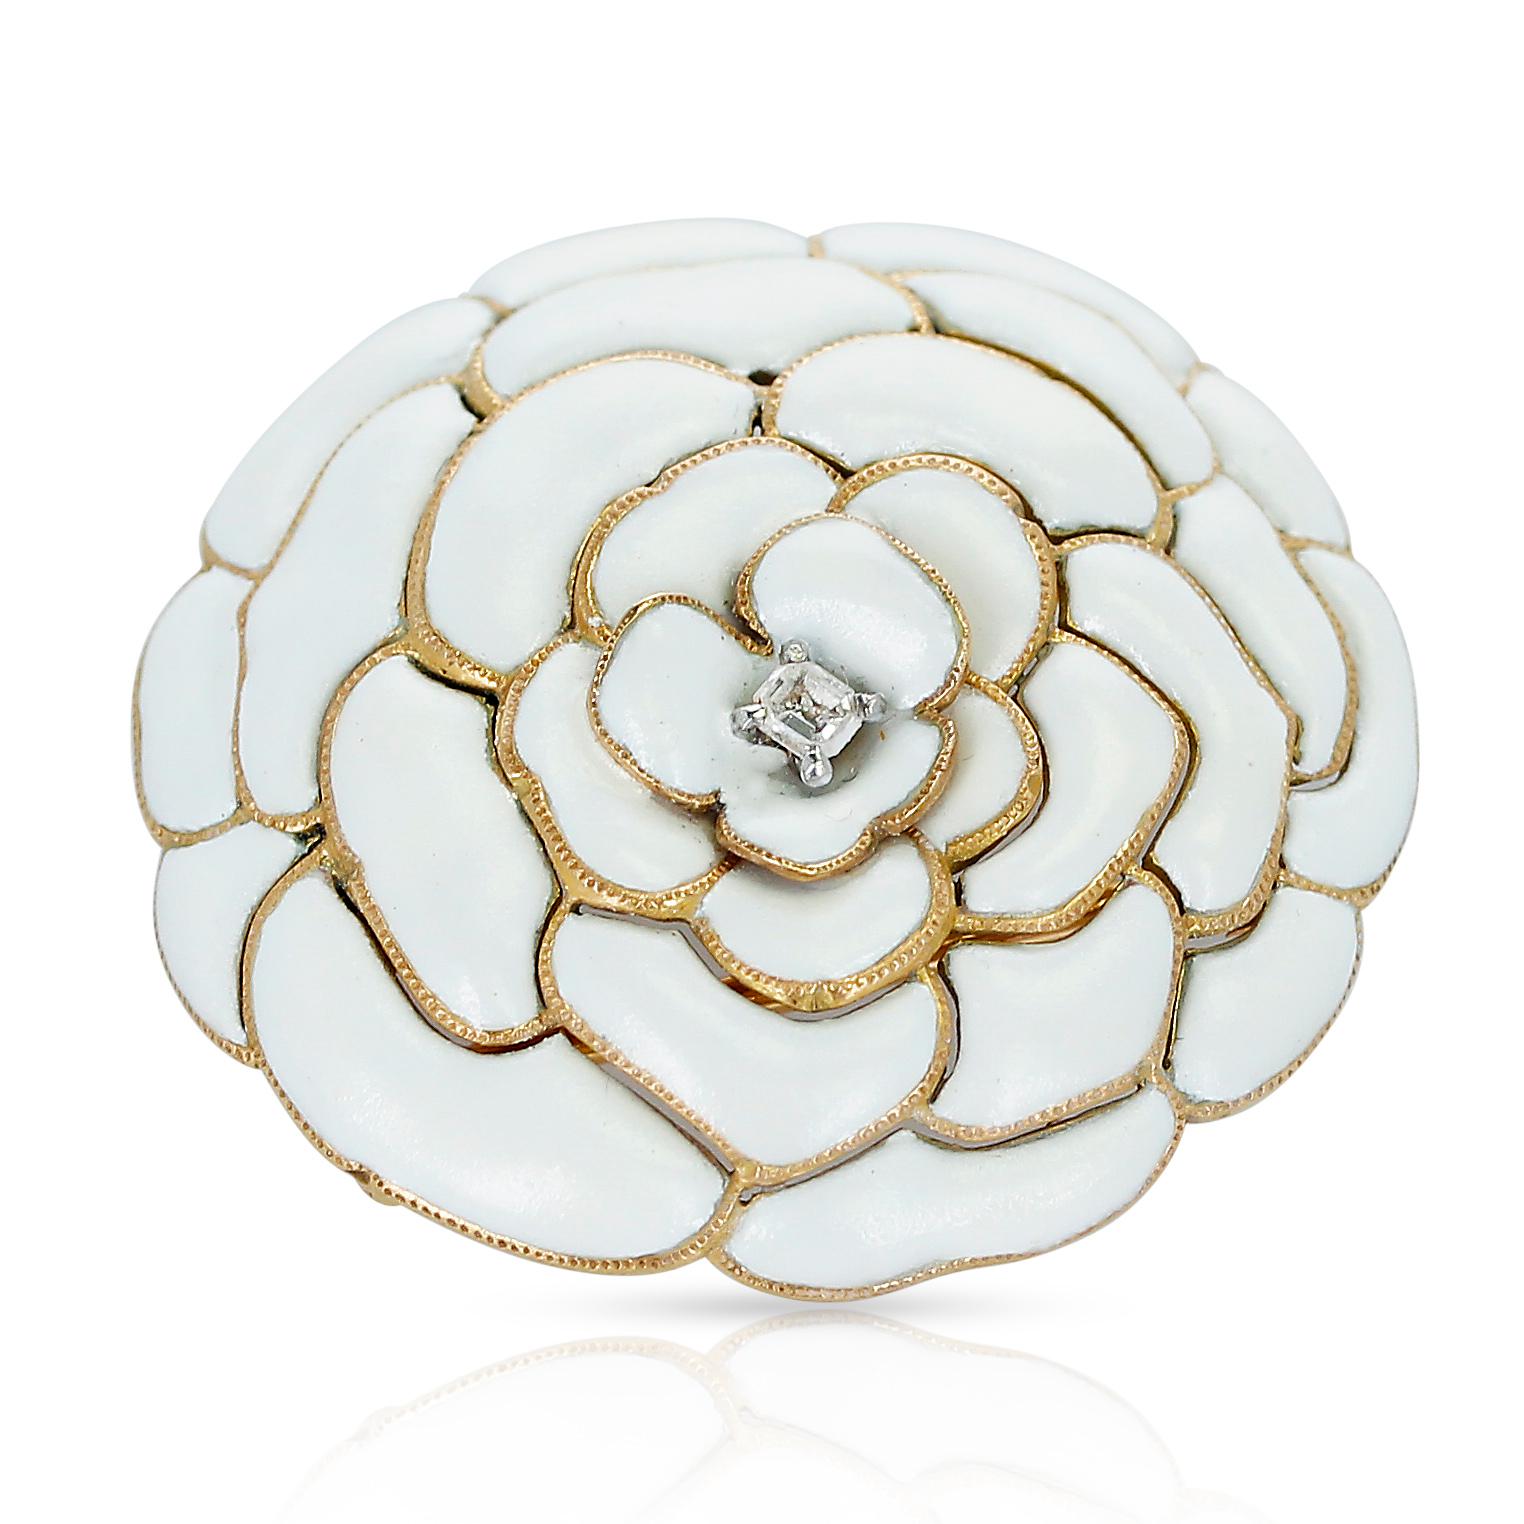 Cartier White Enamel and Diamond Floral Layer Brooch. The length is 3.50 CM, the width is 3.25CM. The total weight is 16.02 grams. There is one diamond in the center of the brooch.                                                                     